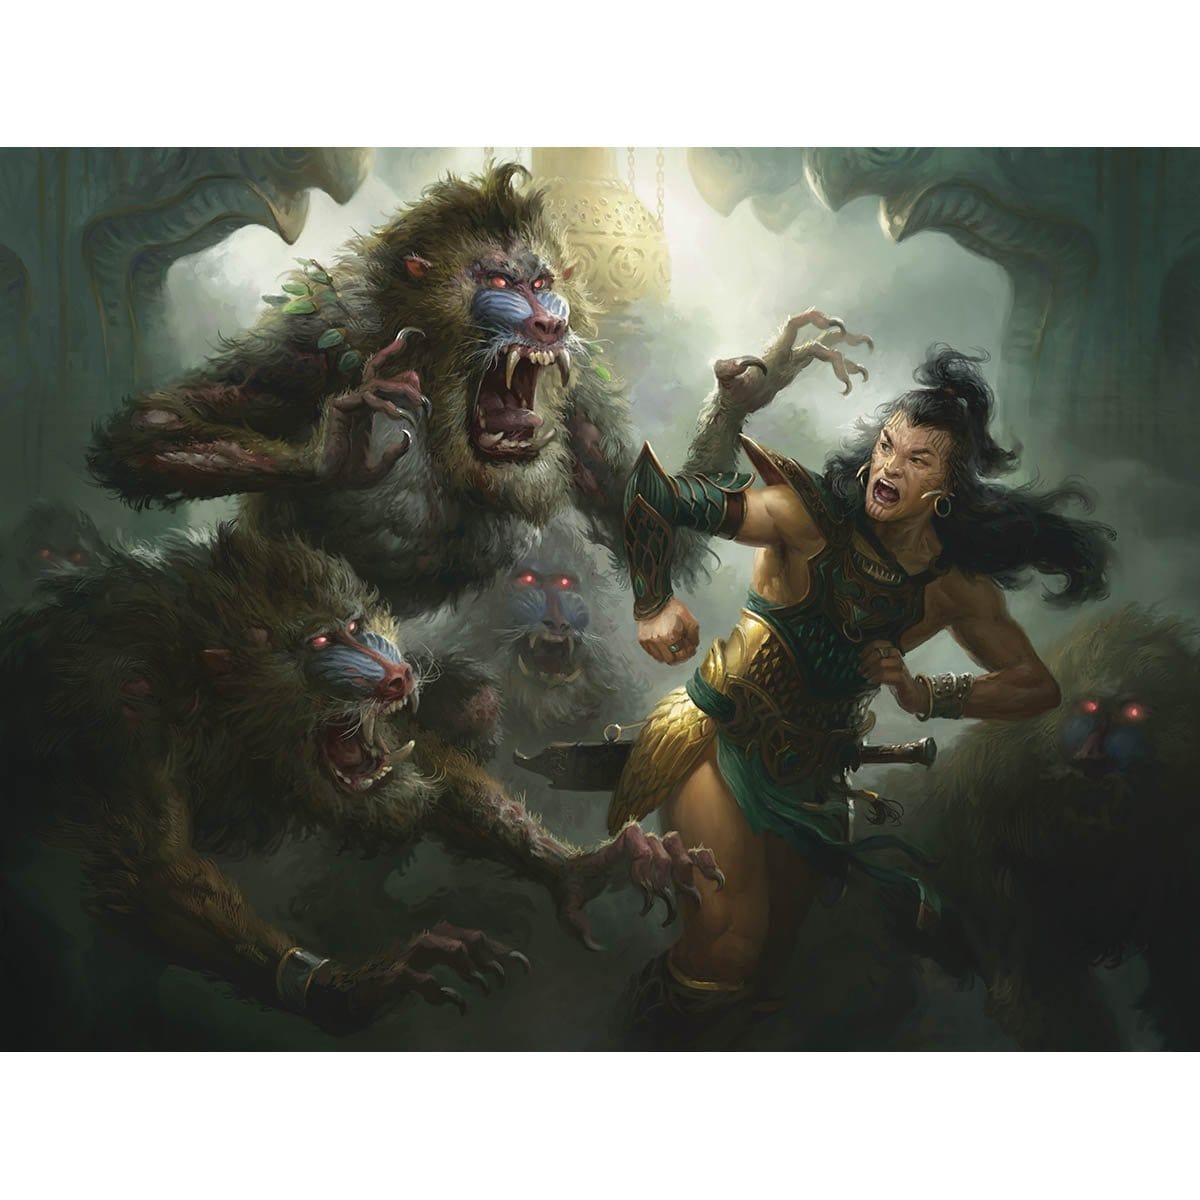 Mob Rule Print - Print - Original Magic Art - Accessories for Magic the Gathering and other card games